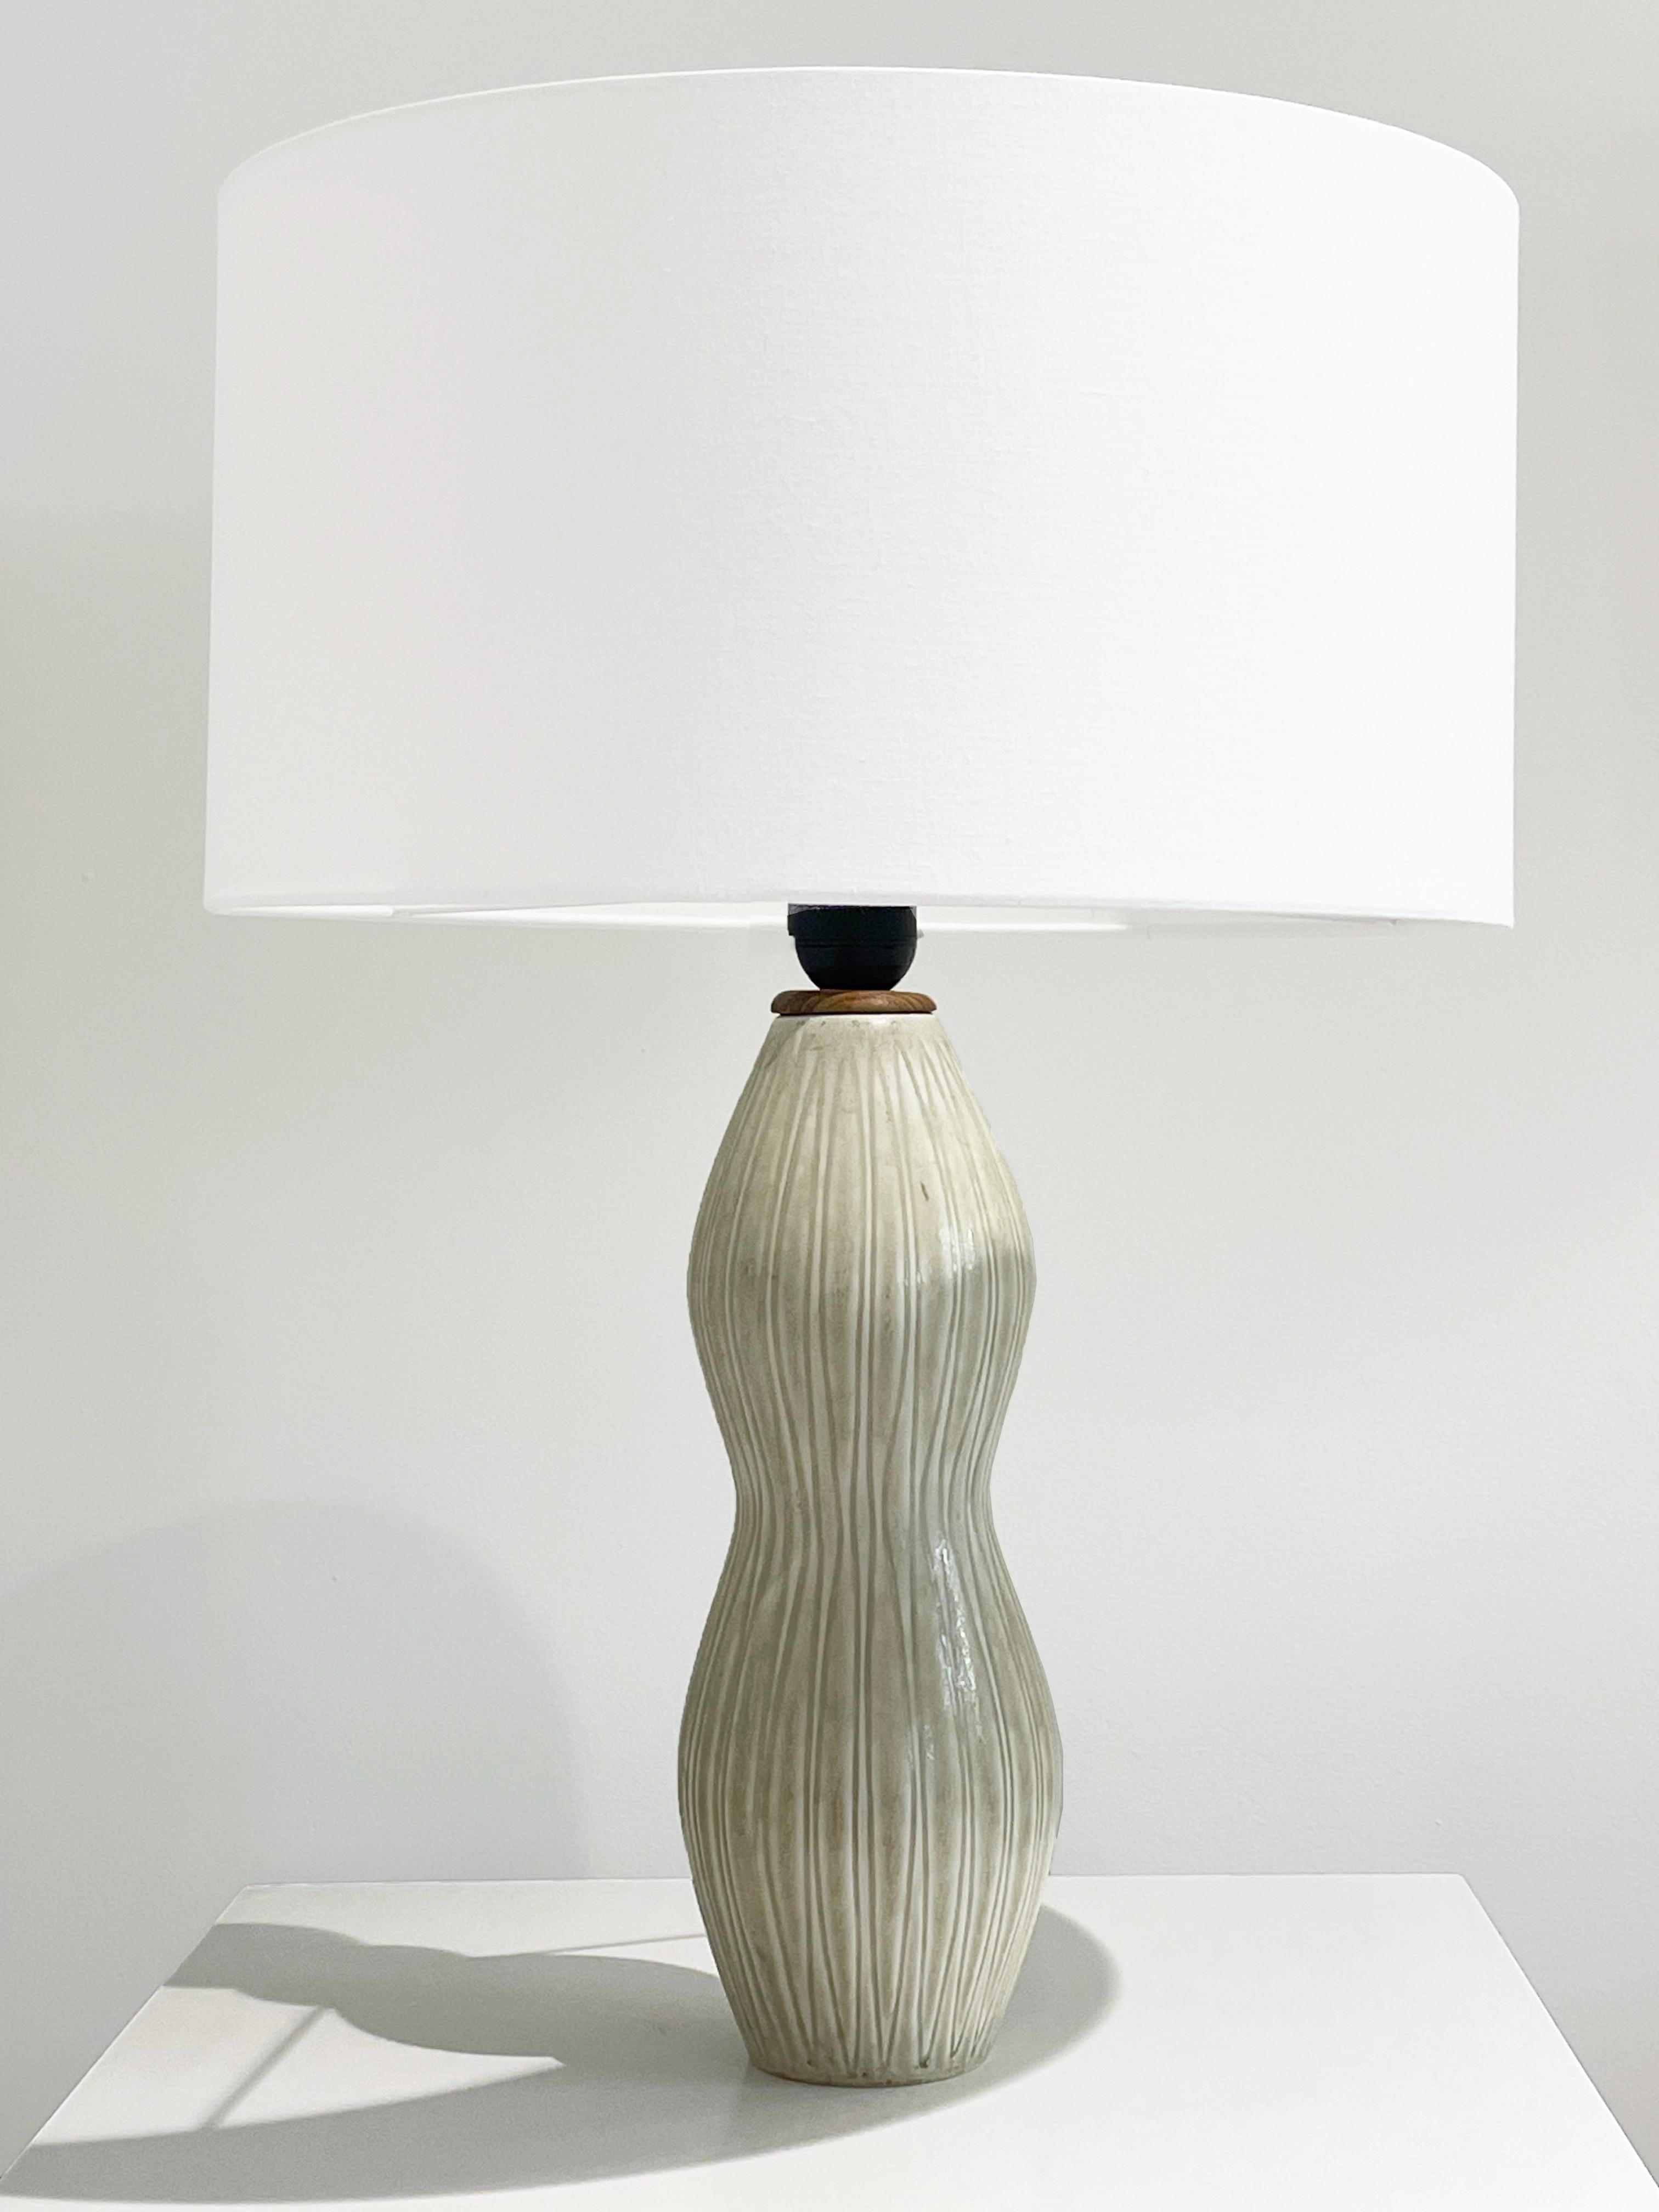 Table Lamp designed by Carl-Harry Stalhane for Rorstränd, signed on the bottom. Sweden 1960s 
This Table lamp follows the forms that define the designer’s best ceramic pieces, with smooth organic shapes and a refined textured surface with stripes